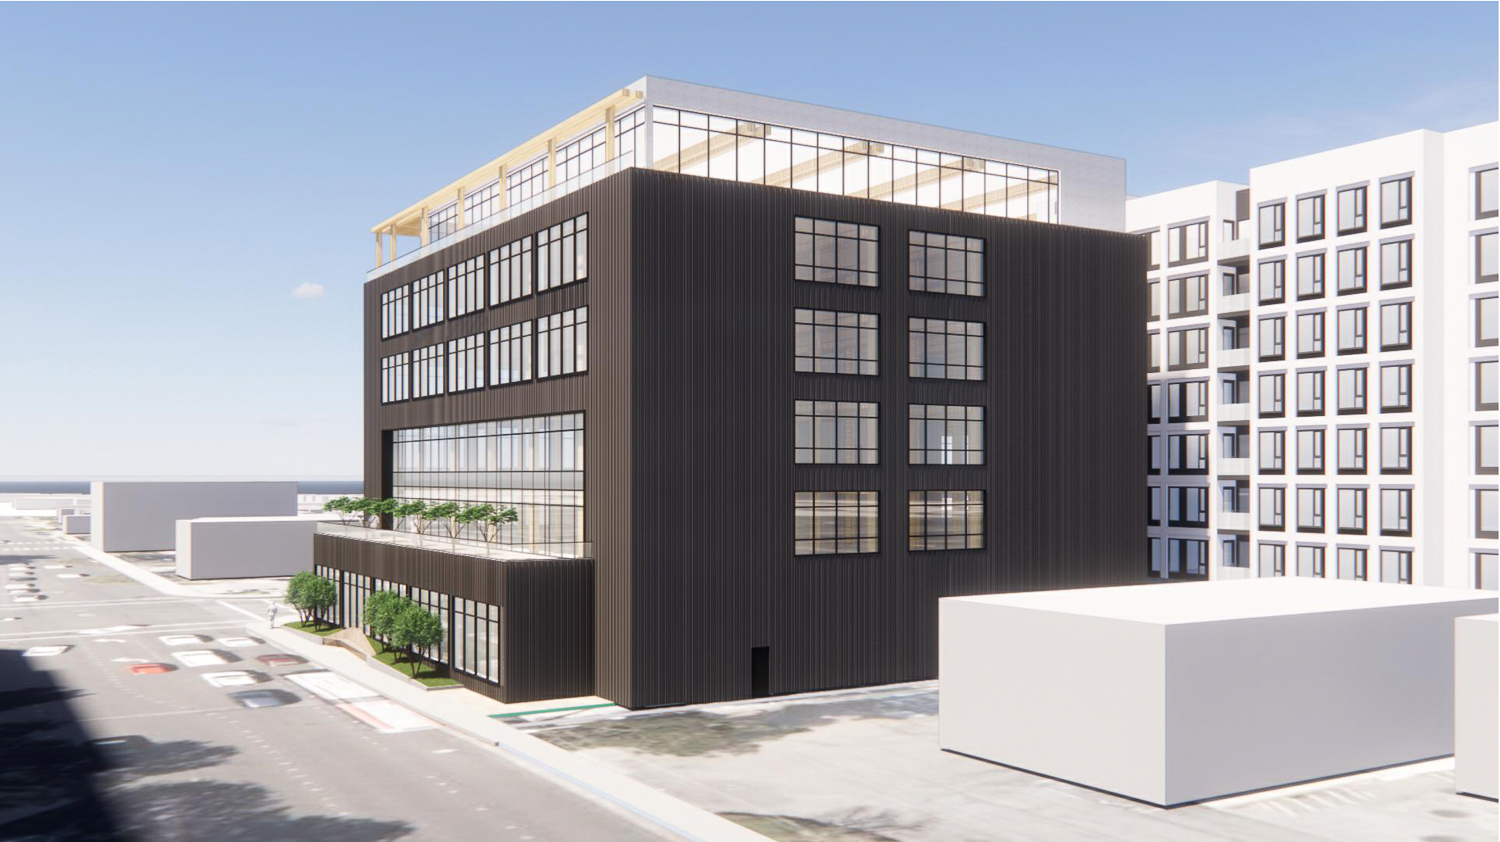 Post + Beam offices along South Delaware Street, rendering by RMW Architecture